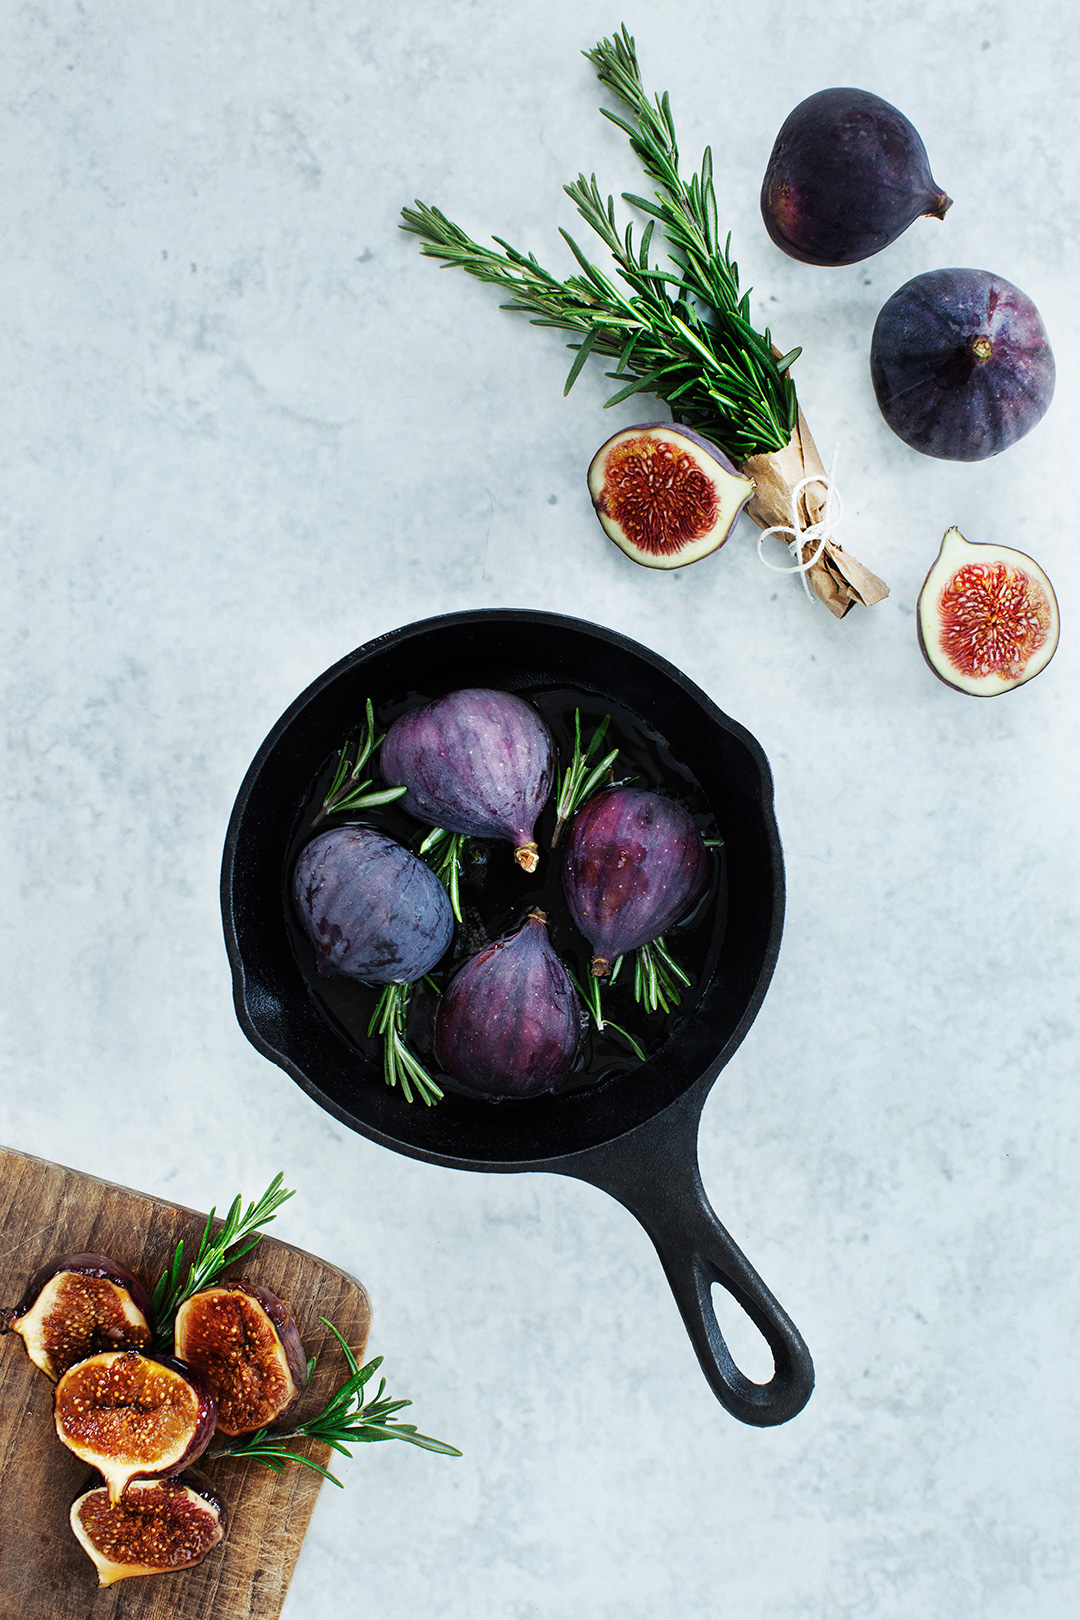 Braised Figs Recipe with Rosemary and Honey. #recipe